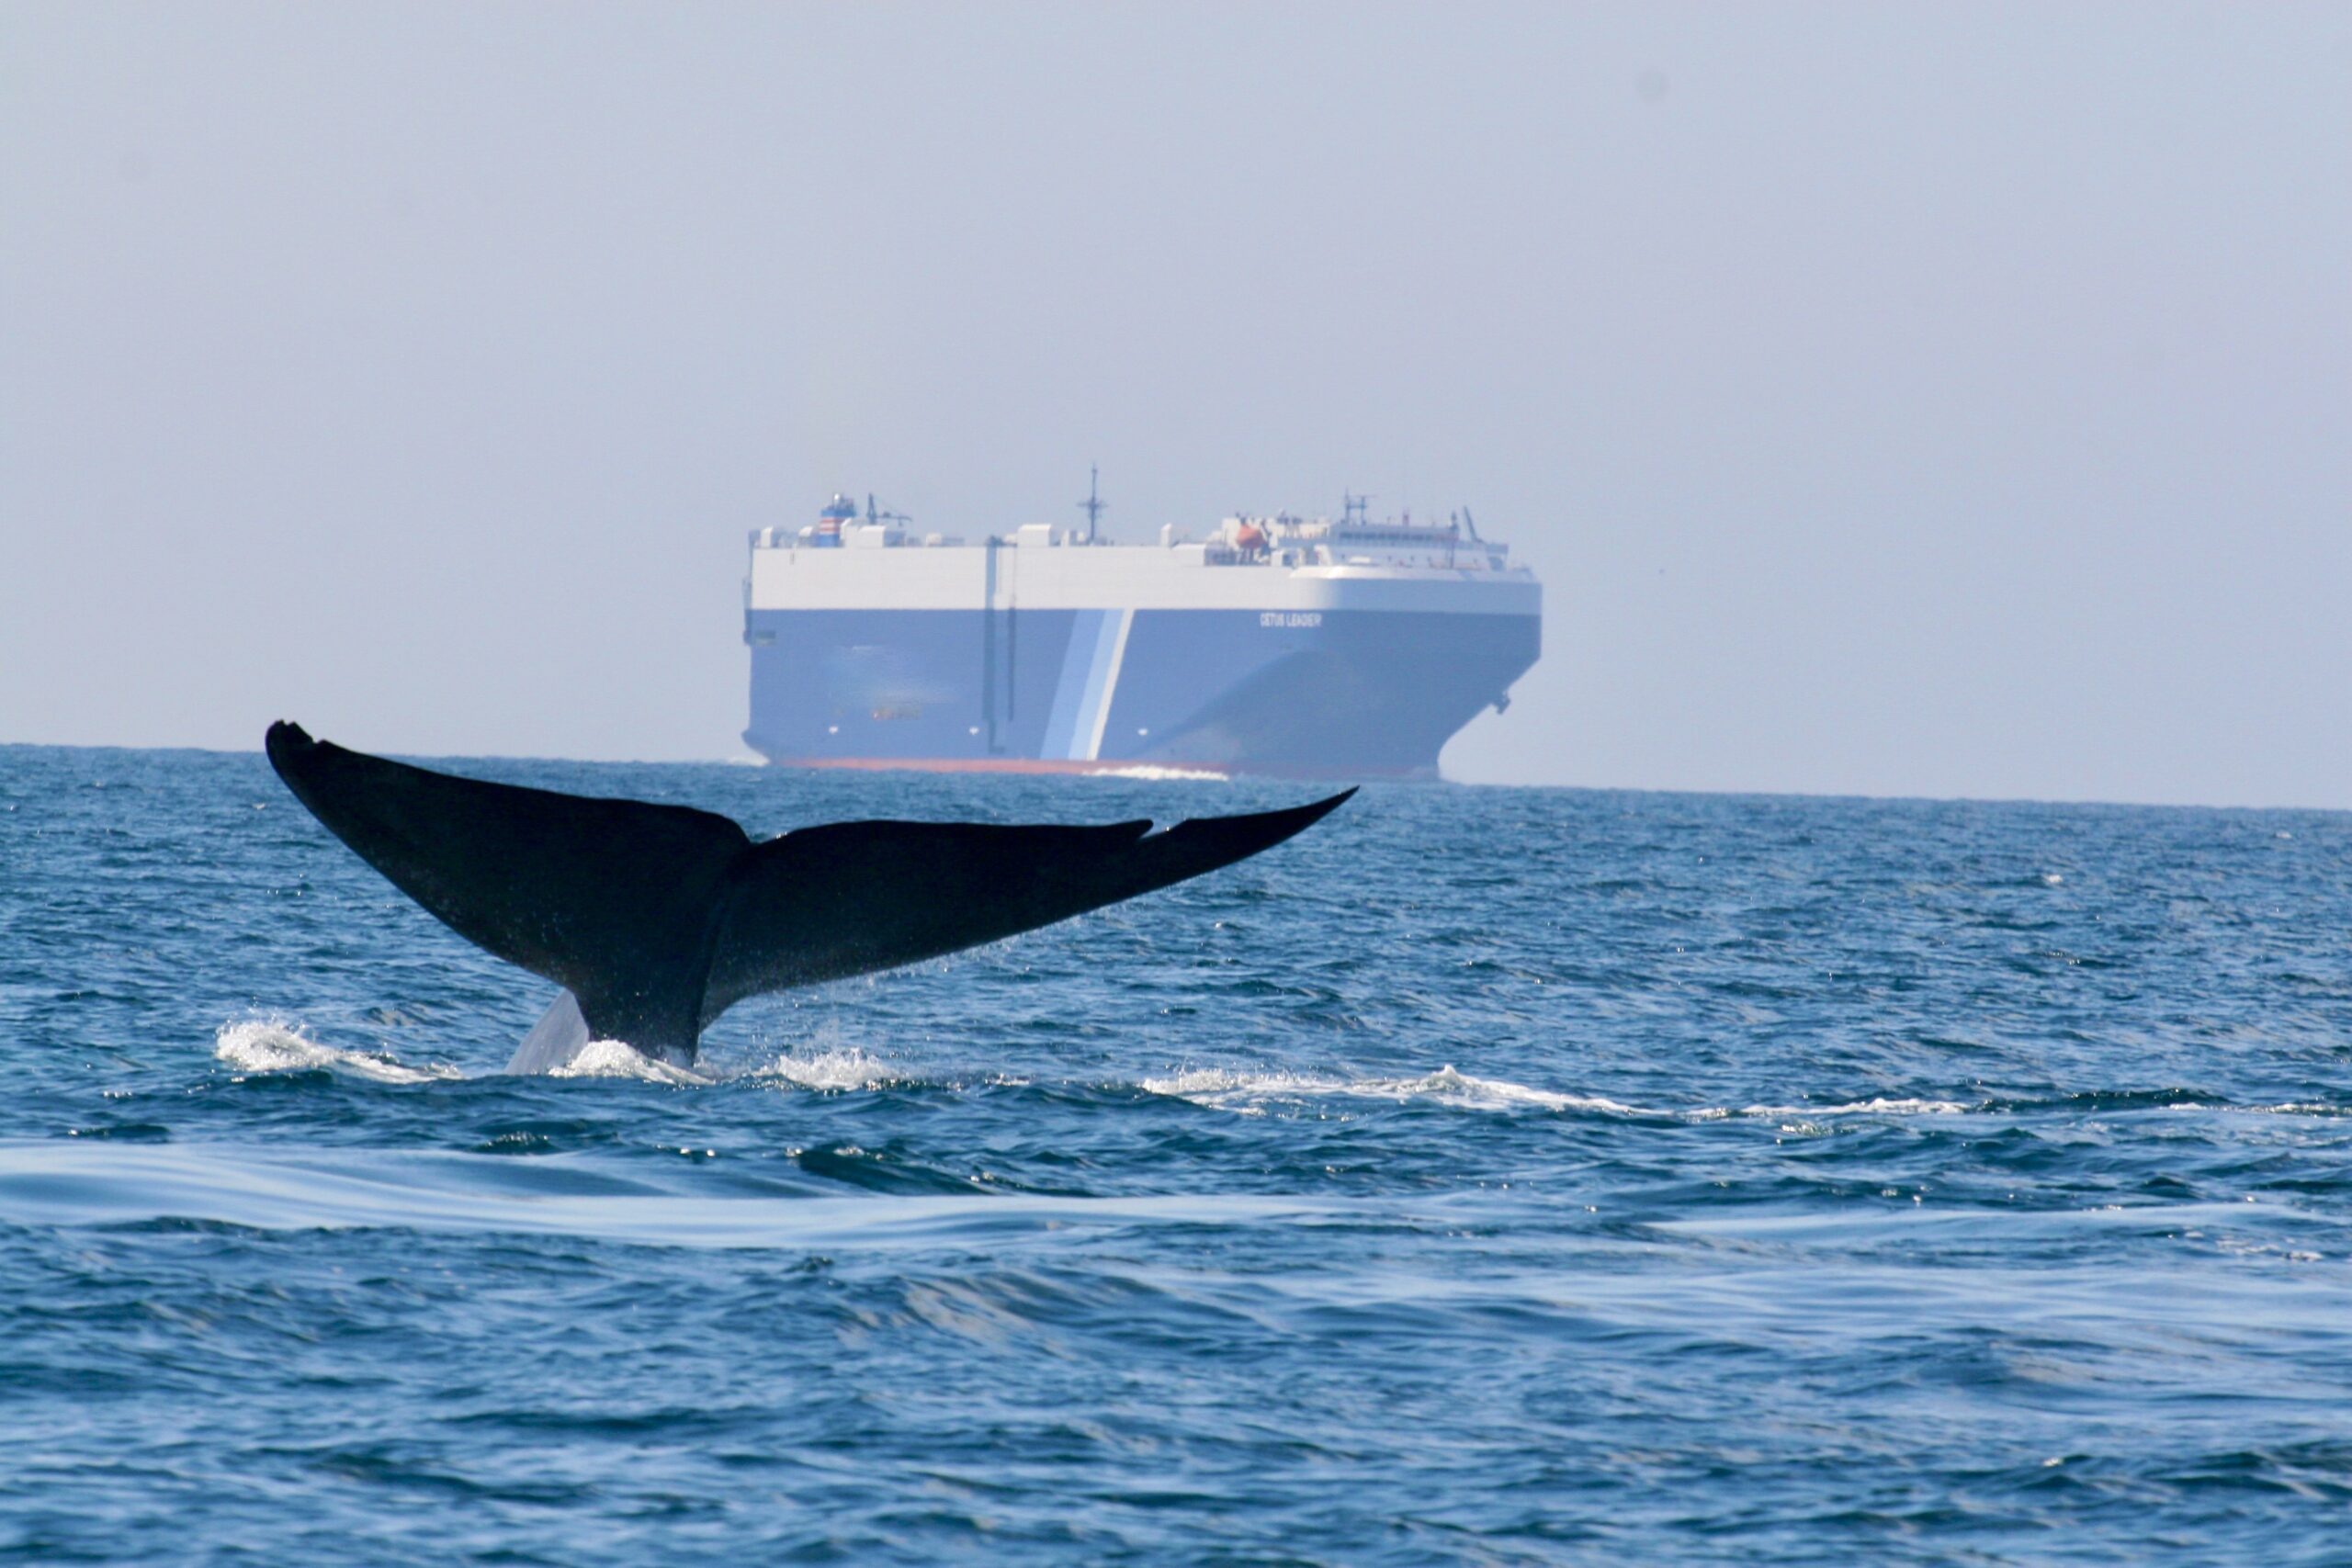 Whale in sea with large ship in distance